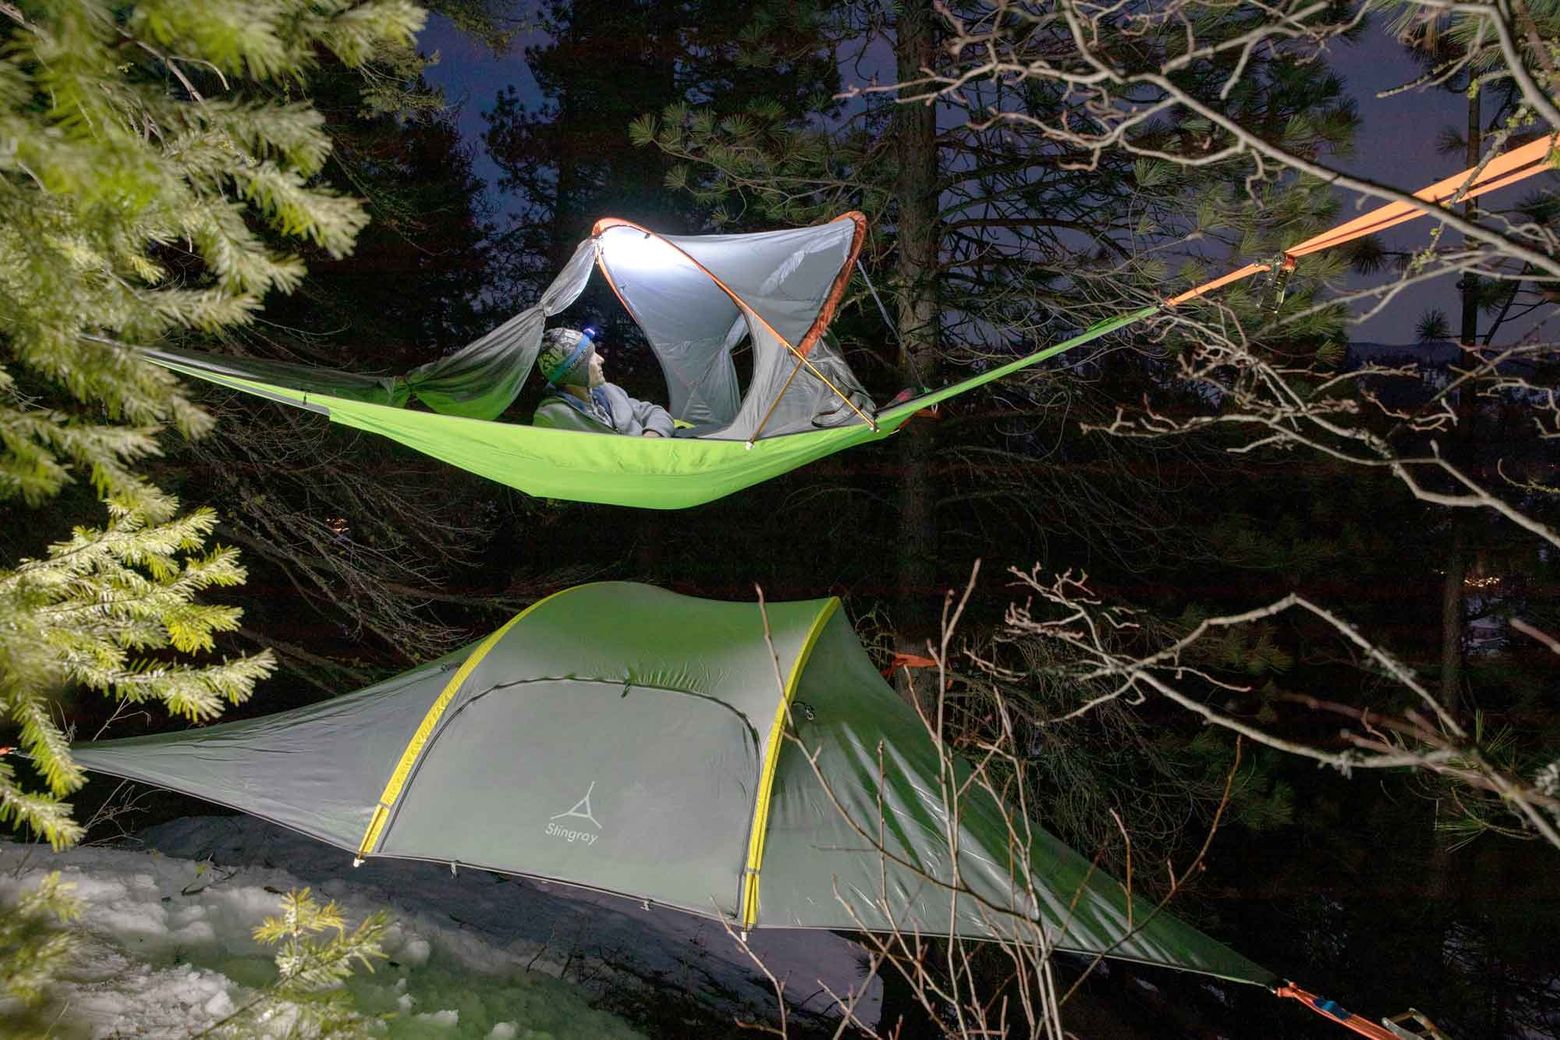 Camping hammocks that will take you from 'ouch' to 'ahhh